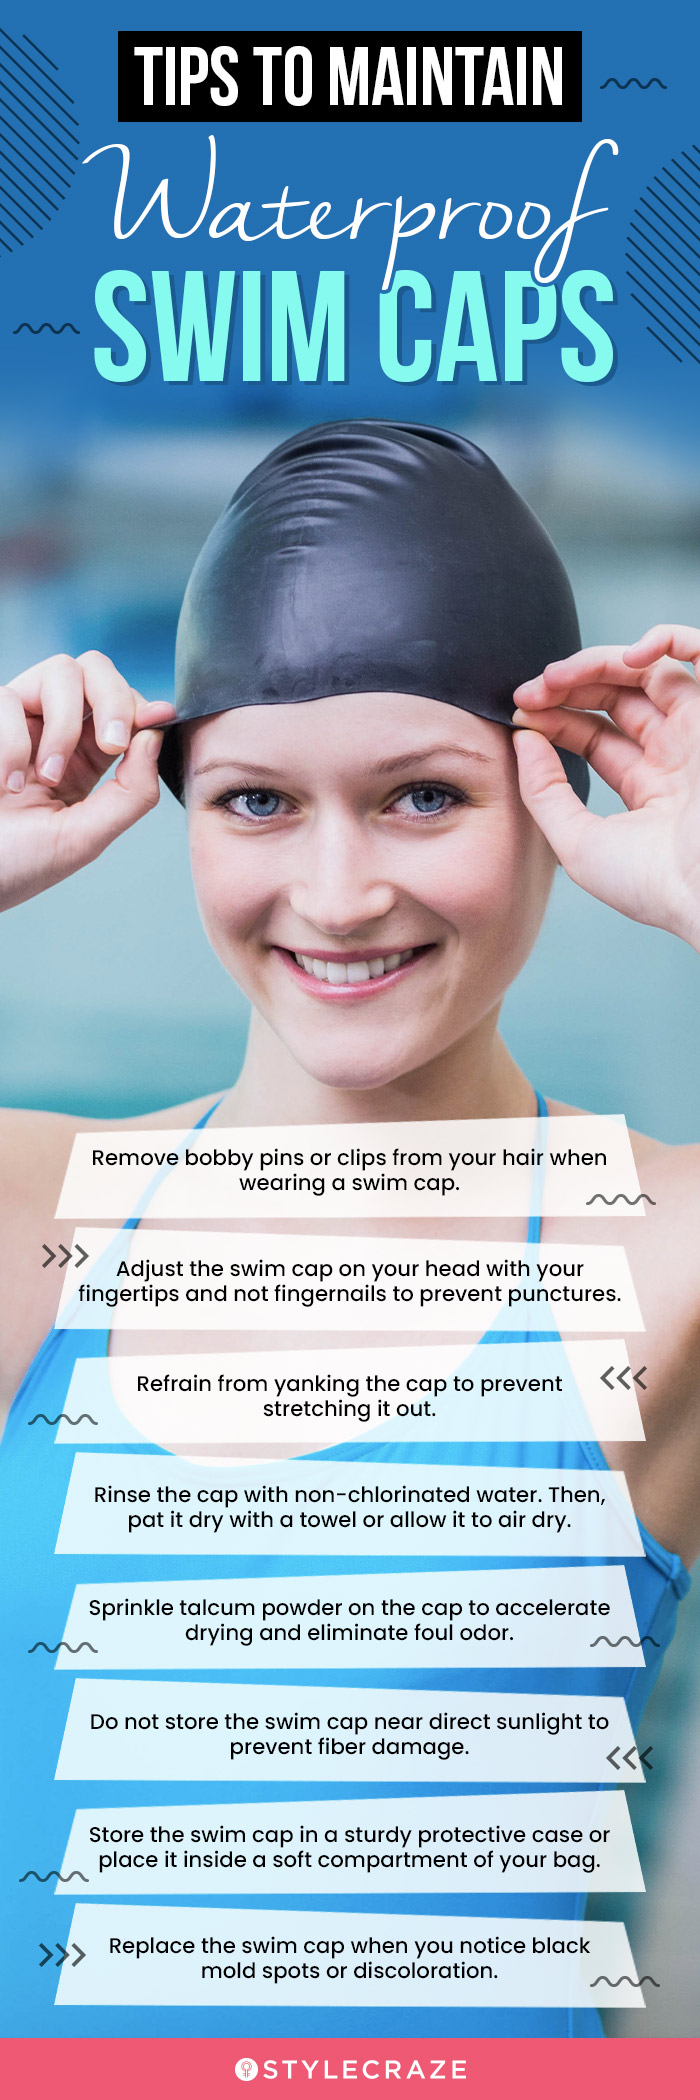 Tips To Care For Waterproof Swim Caps (infographic)